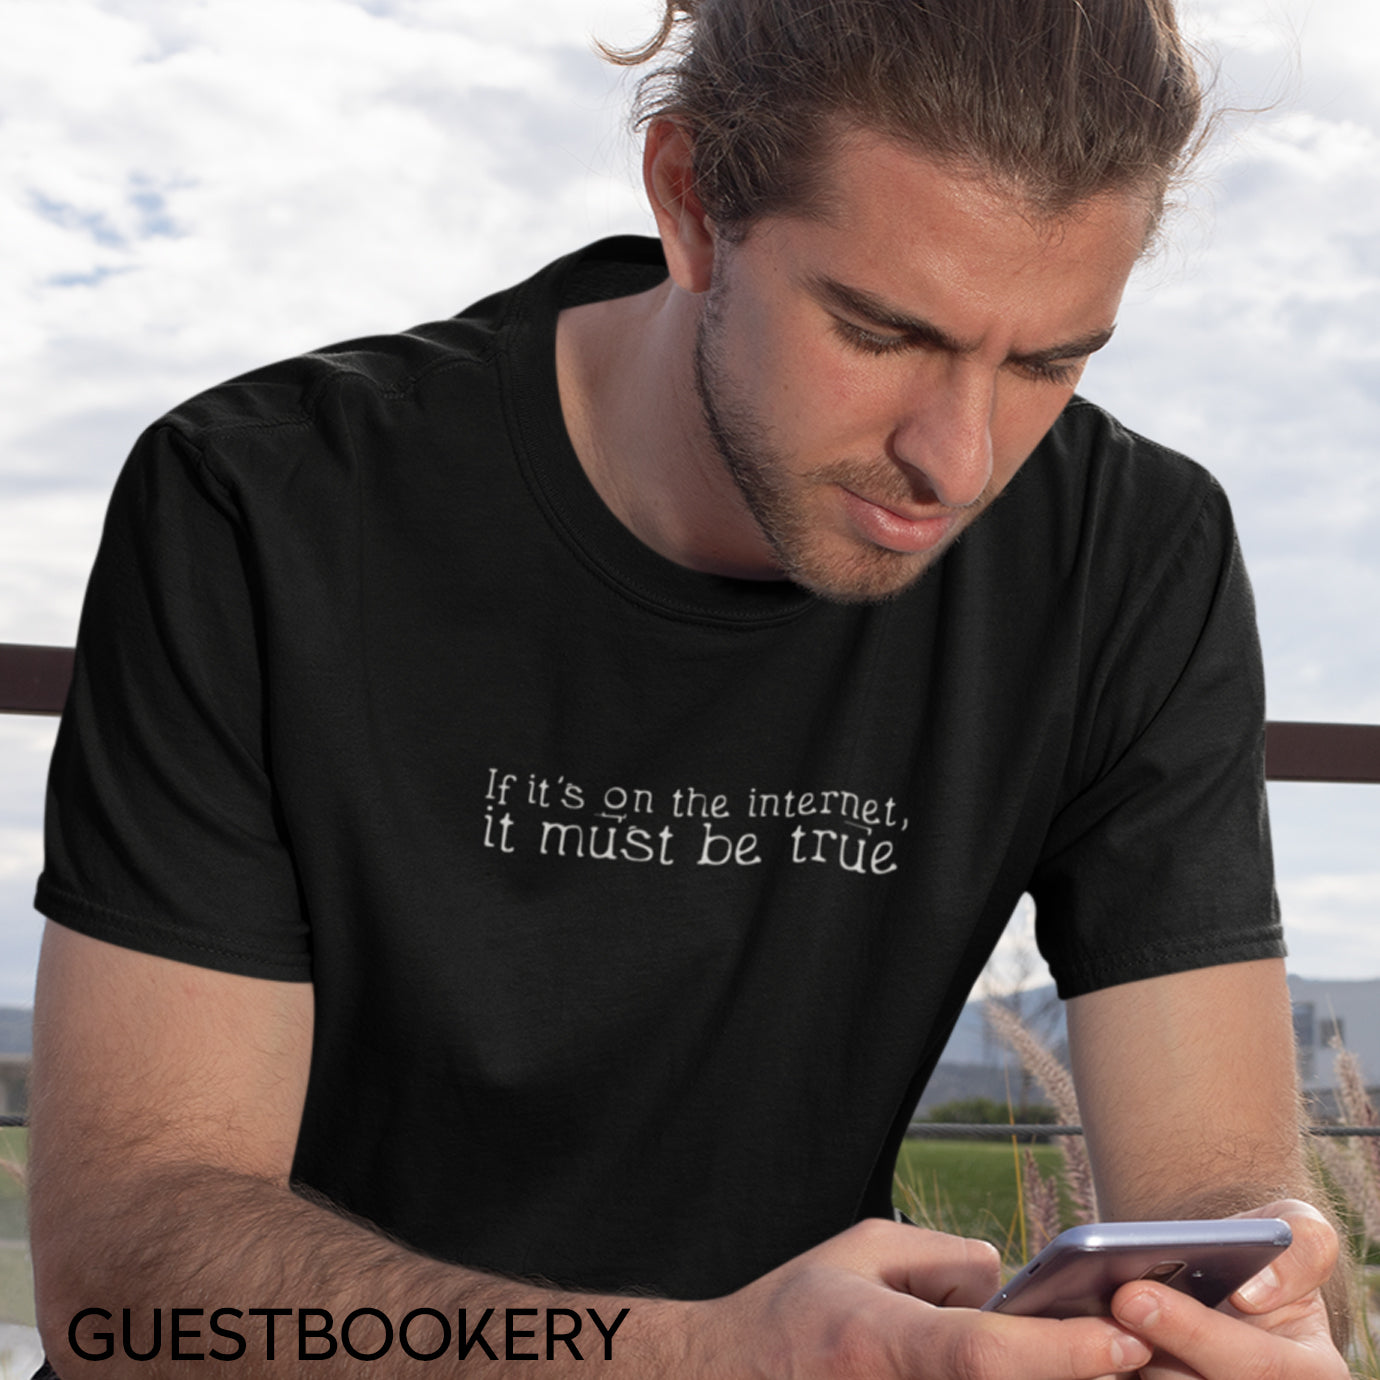 If it's on the internet, it must be true t-shirt